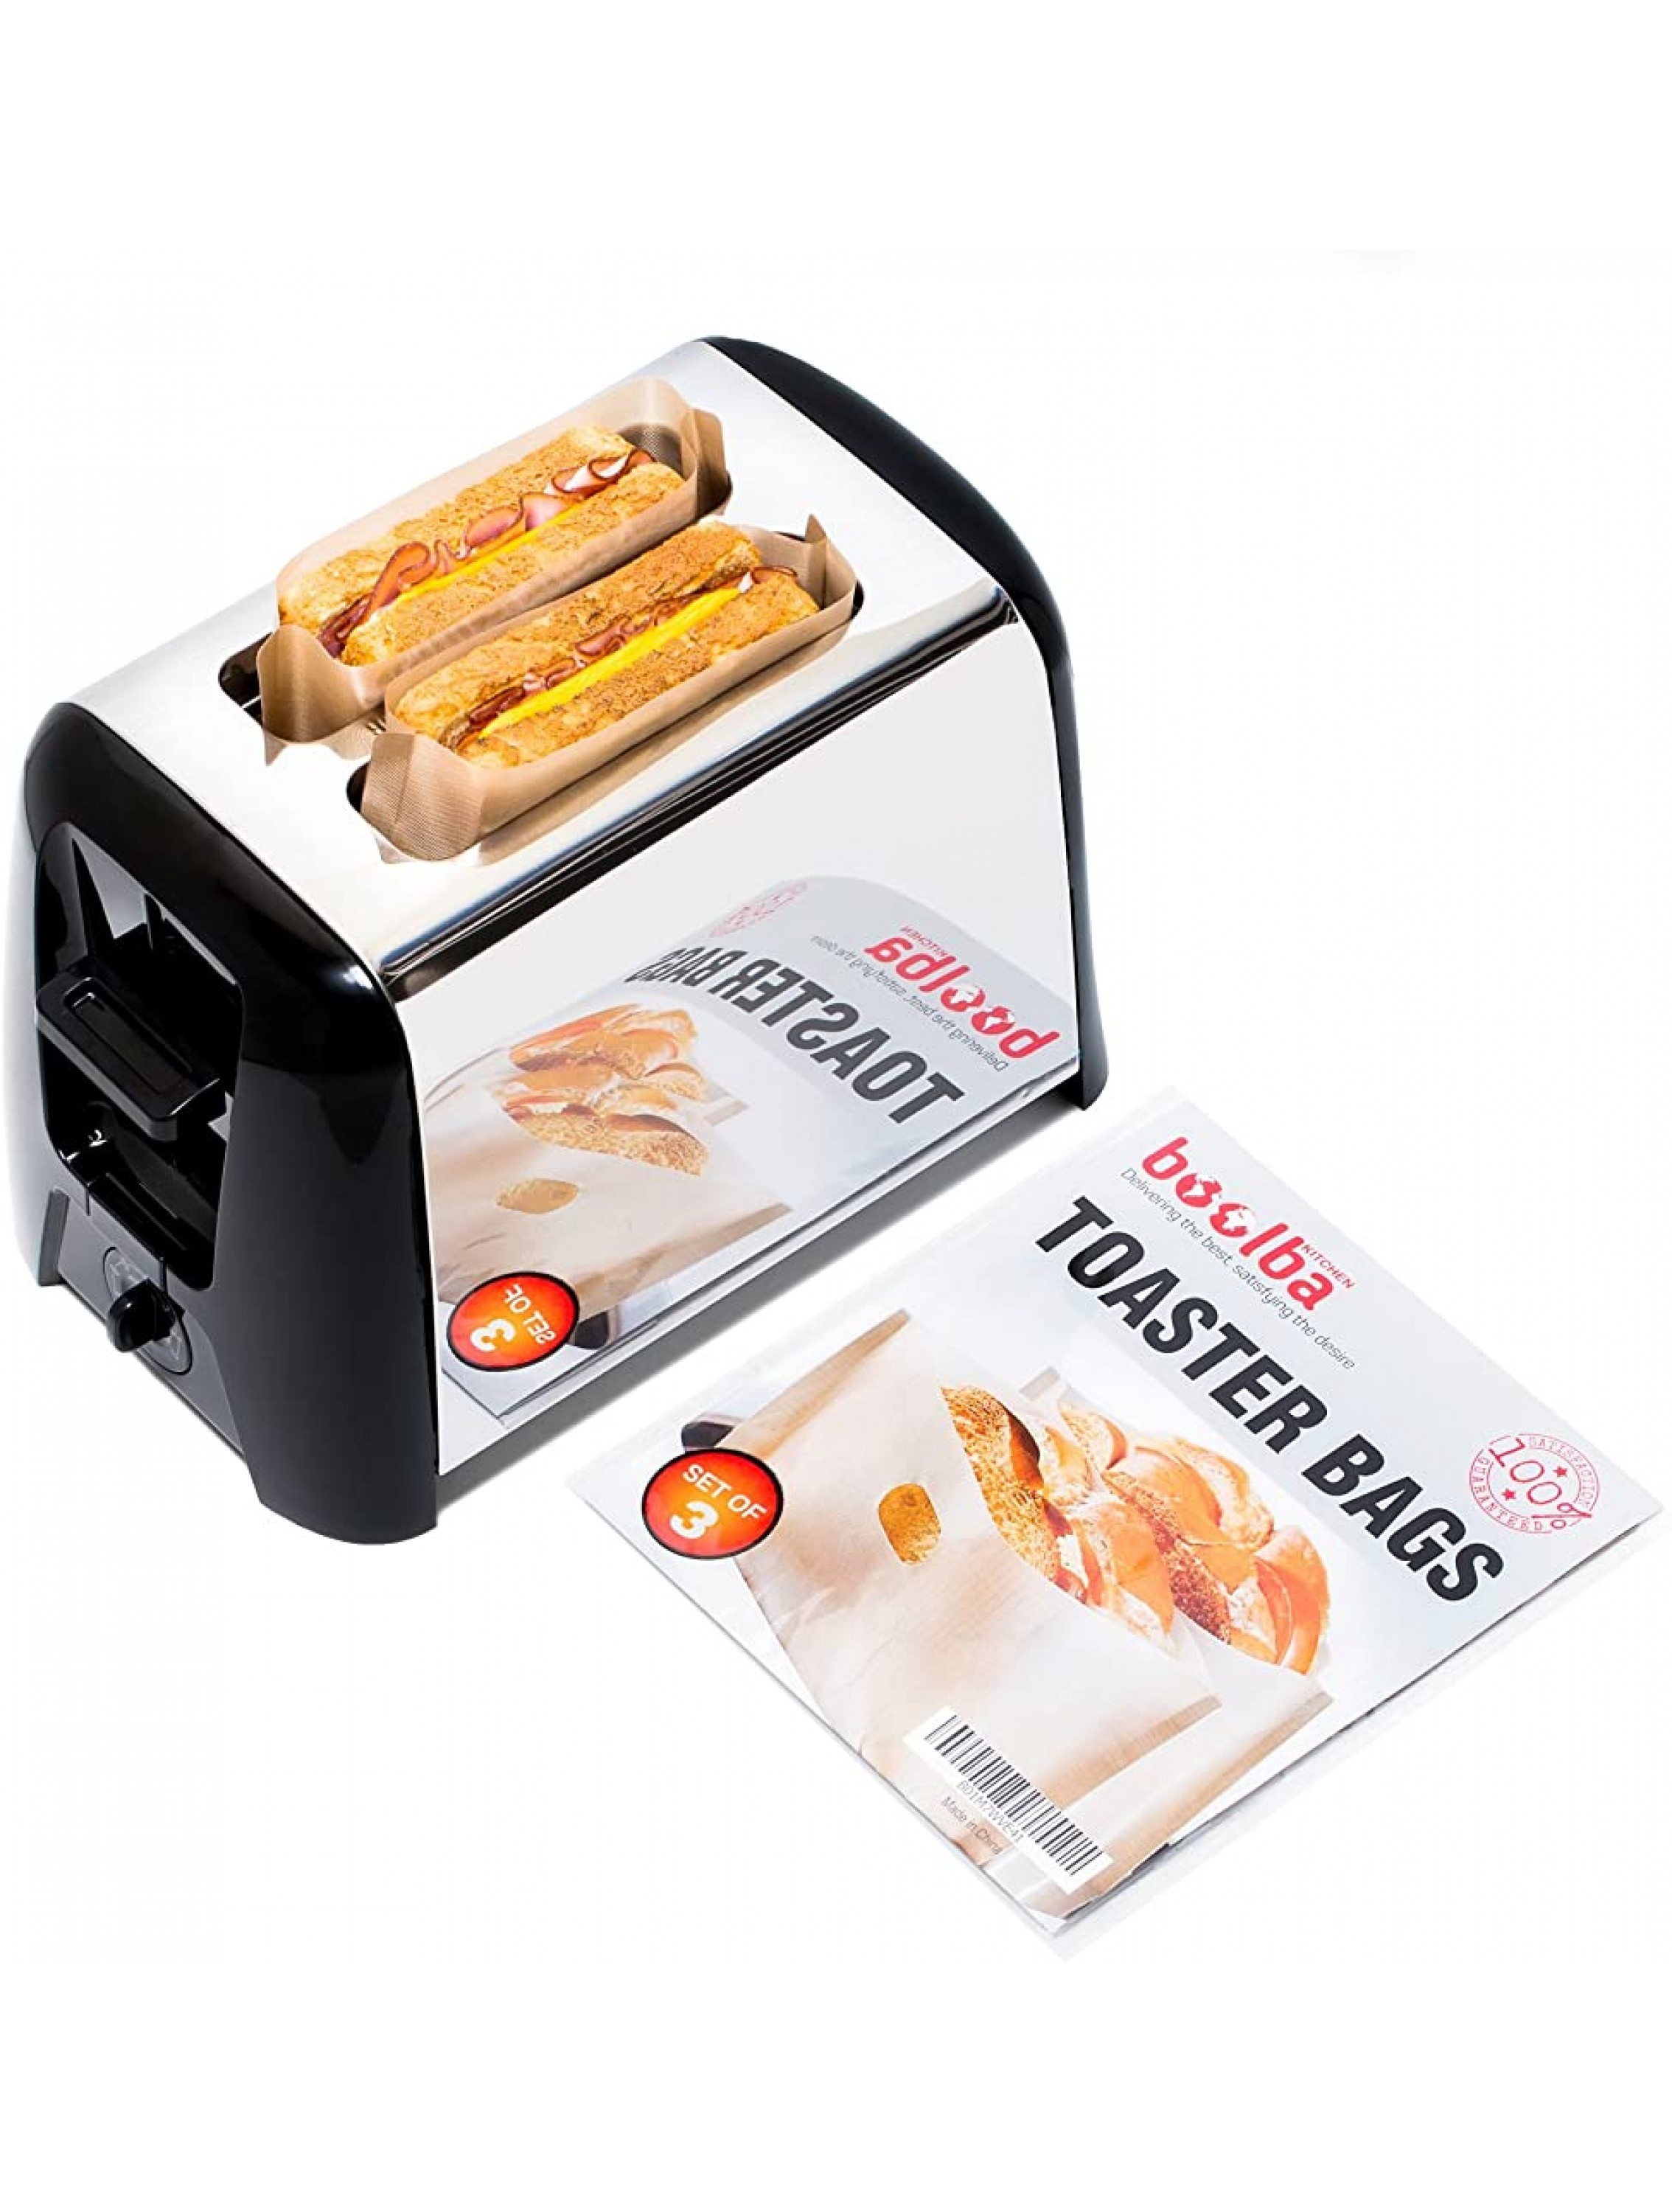 Toaster Bags set of 3 | Grilled Cheese Made Easy | Non Stick Reusable Easy to Clean | Perfect For Sandwiches Hot Dogs Chicken Fish Vegetables Panini & Garlic Toast - B7ES6K0J7